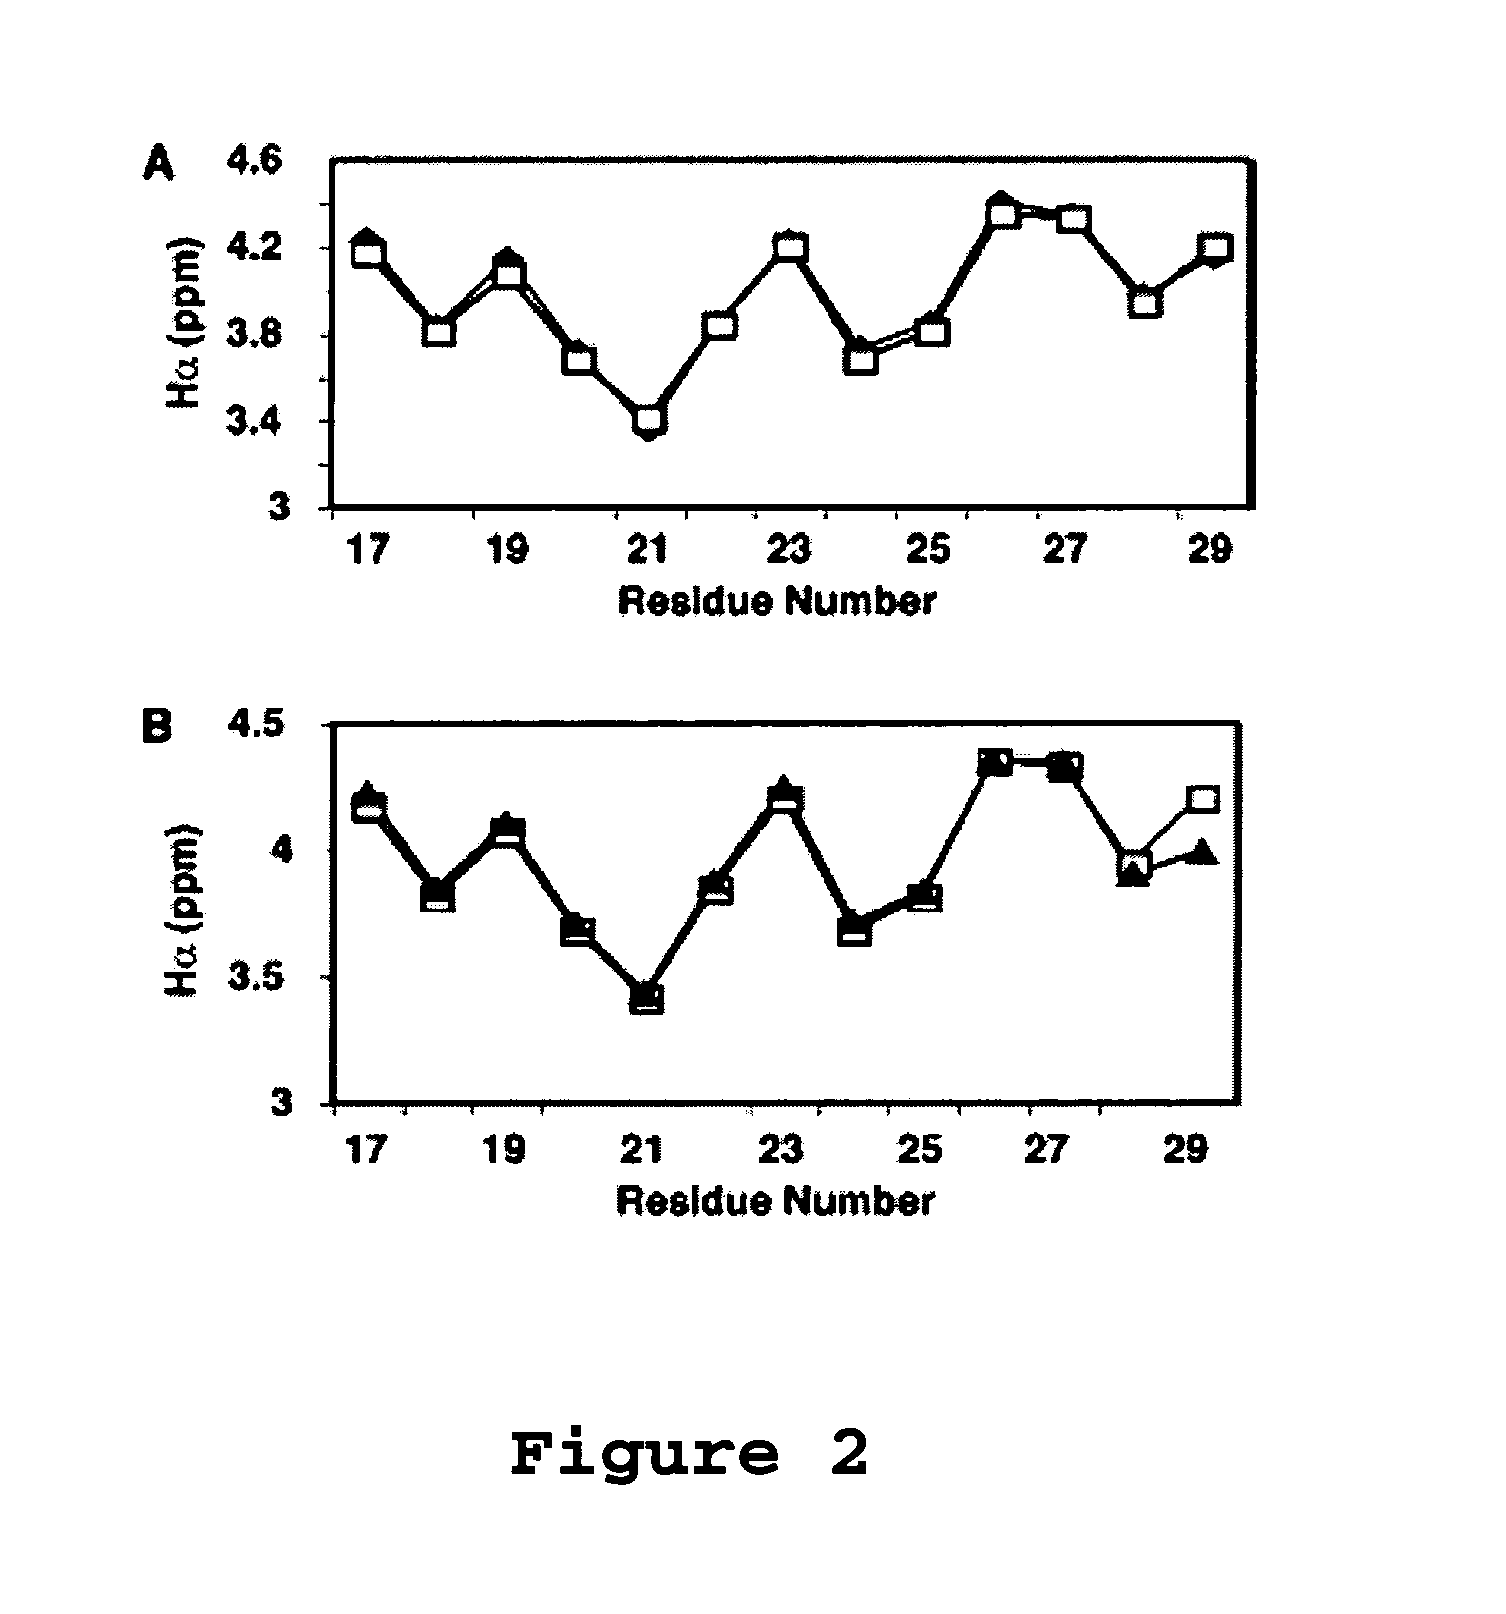 Antimicrobial peptides and methods of identifying the same